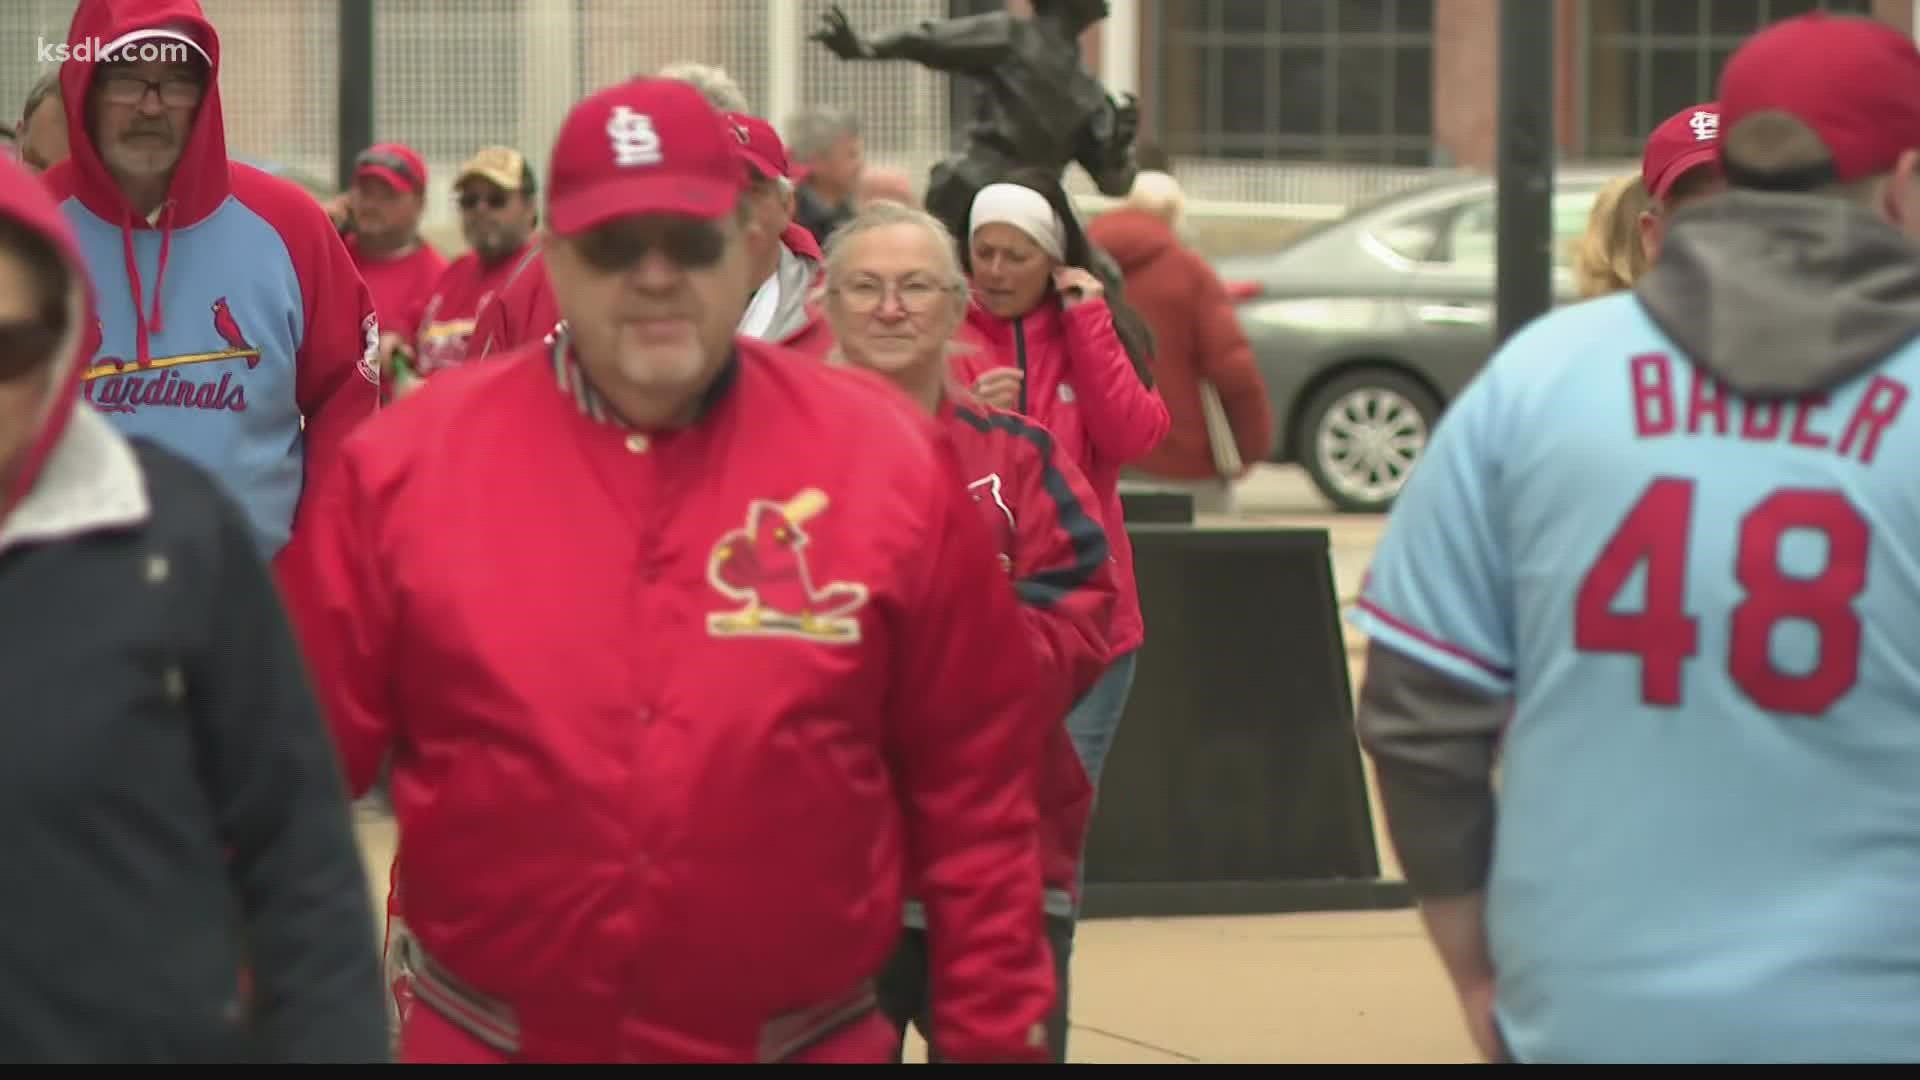 For 50 years, with a pause due to the pandemic, the Hoegemeiers have been at Busch Stadium for the Cardinals' opening day.